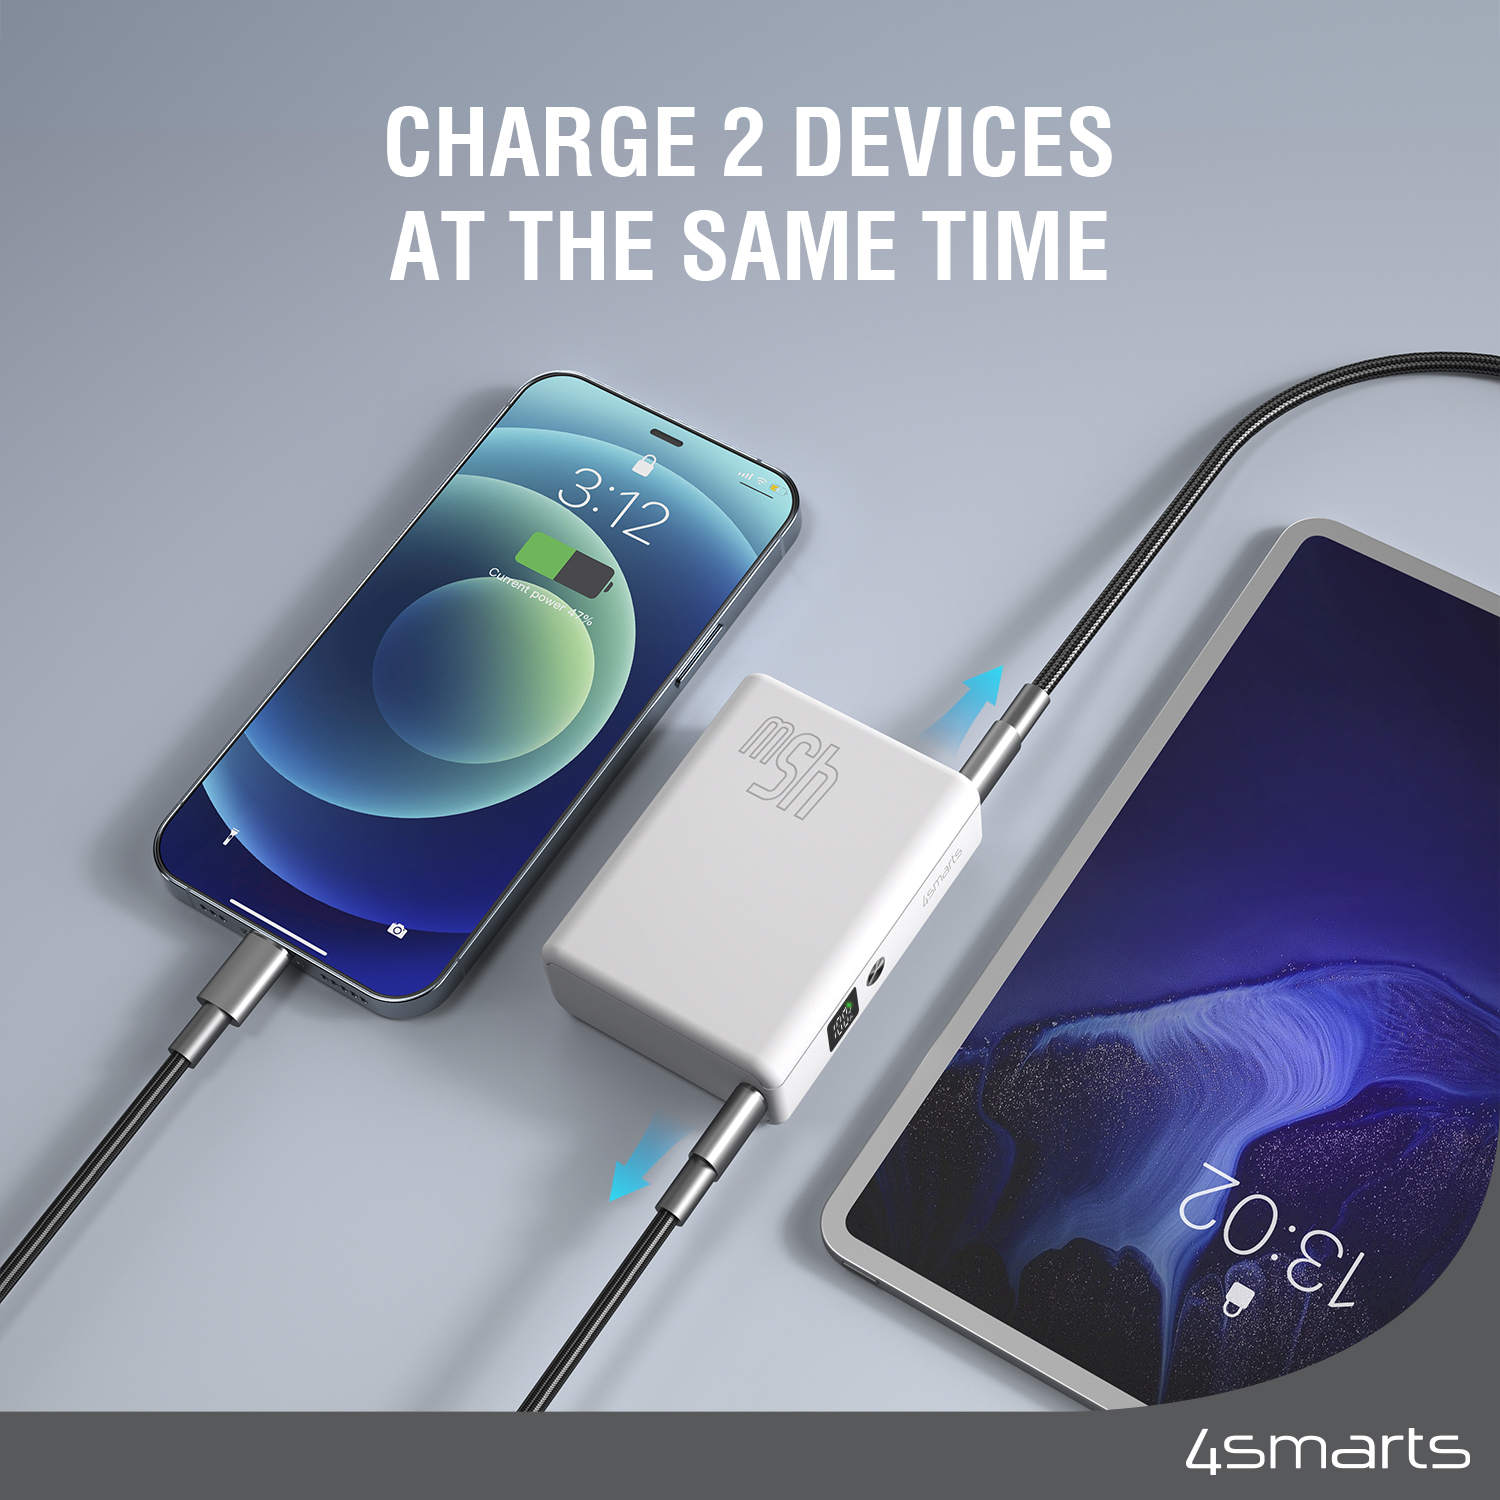 The 4smarts Powerbank Pocket Slim 10000mAh 45W white charges 2 devices simultaneously.